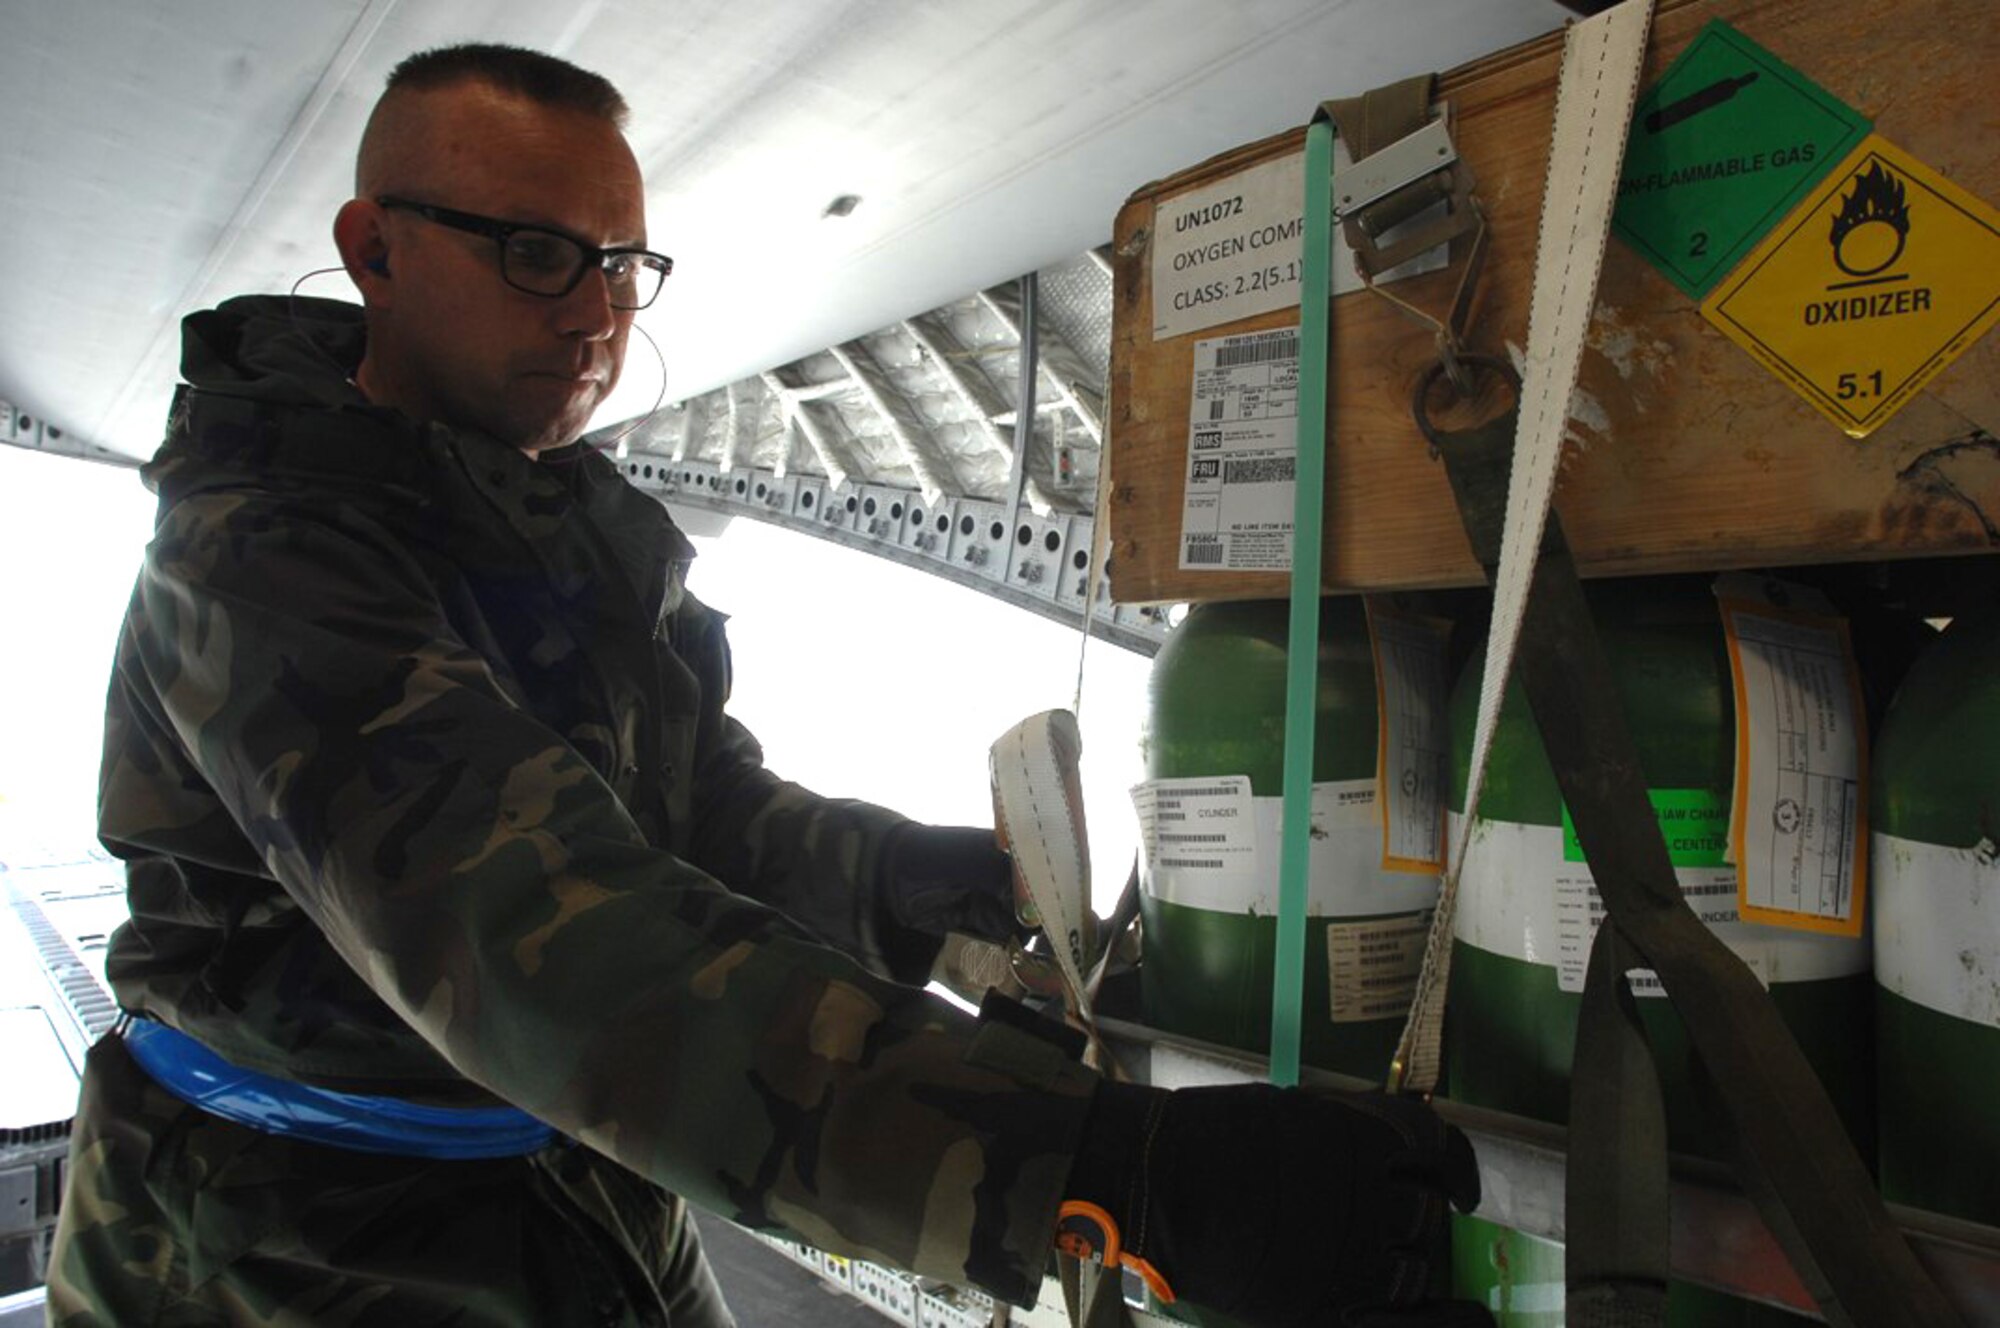 Kasper Chevalier, 721st Aerial Port Squadron aerial porter checks over the cargo after being loaded into a C-17, Globemaster III. Recently Mr. Chevalier became the first Air Force civilian to reach 500 APEX missions. The APEX program allows select air transportation personnel to obtain qualifications similar to aircraft loadmasters, enabling a shorter on the ground time for loadcrews. (U.S. Air Force photo by Tech. Sgt. Michael Voss)